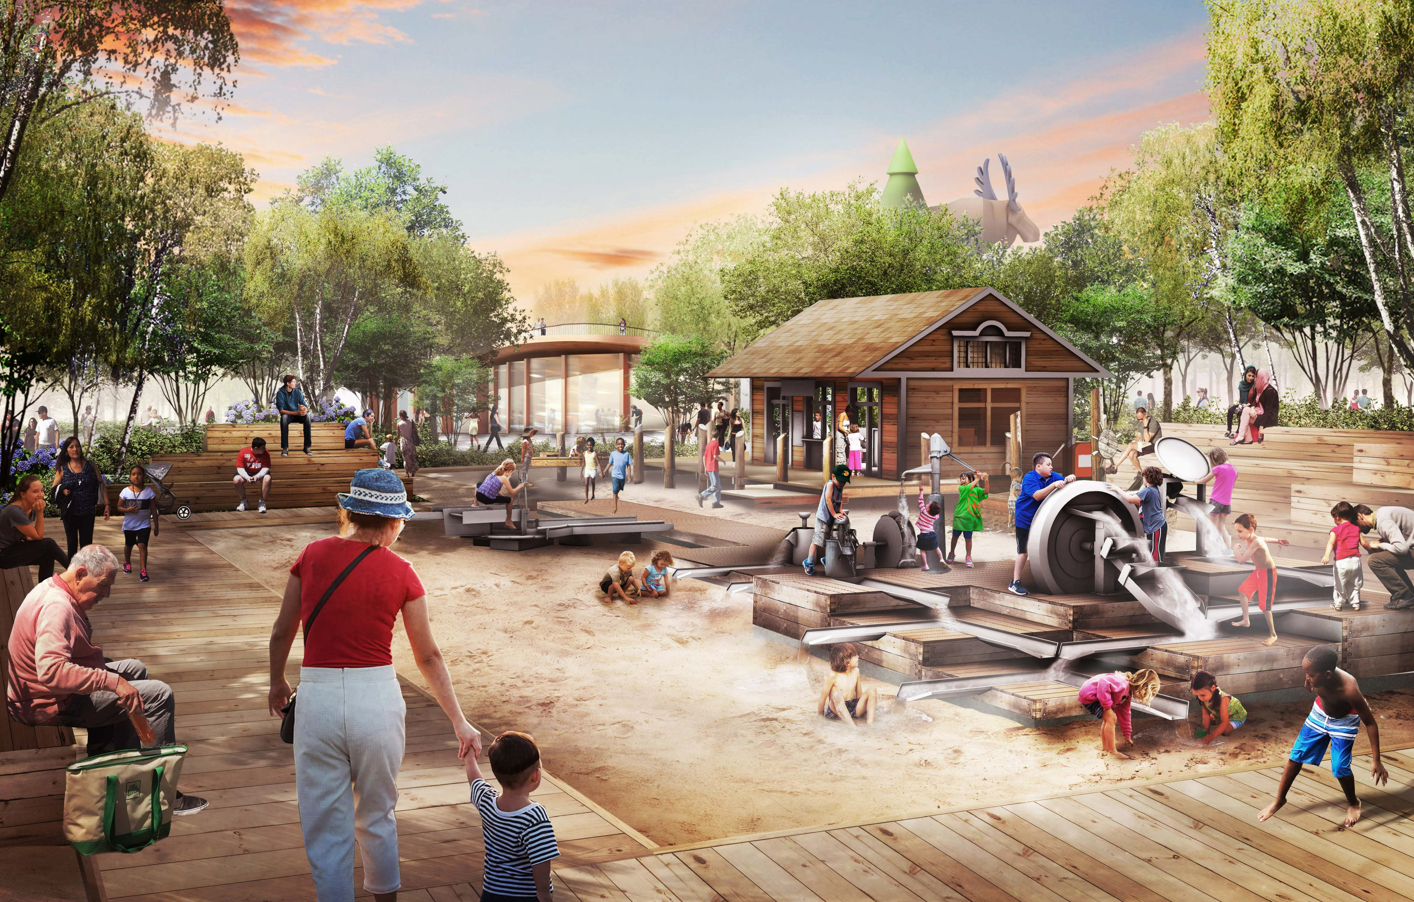 Rendering of children exploring play features in a park